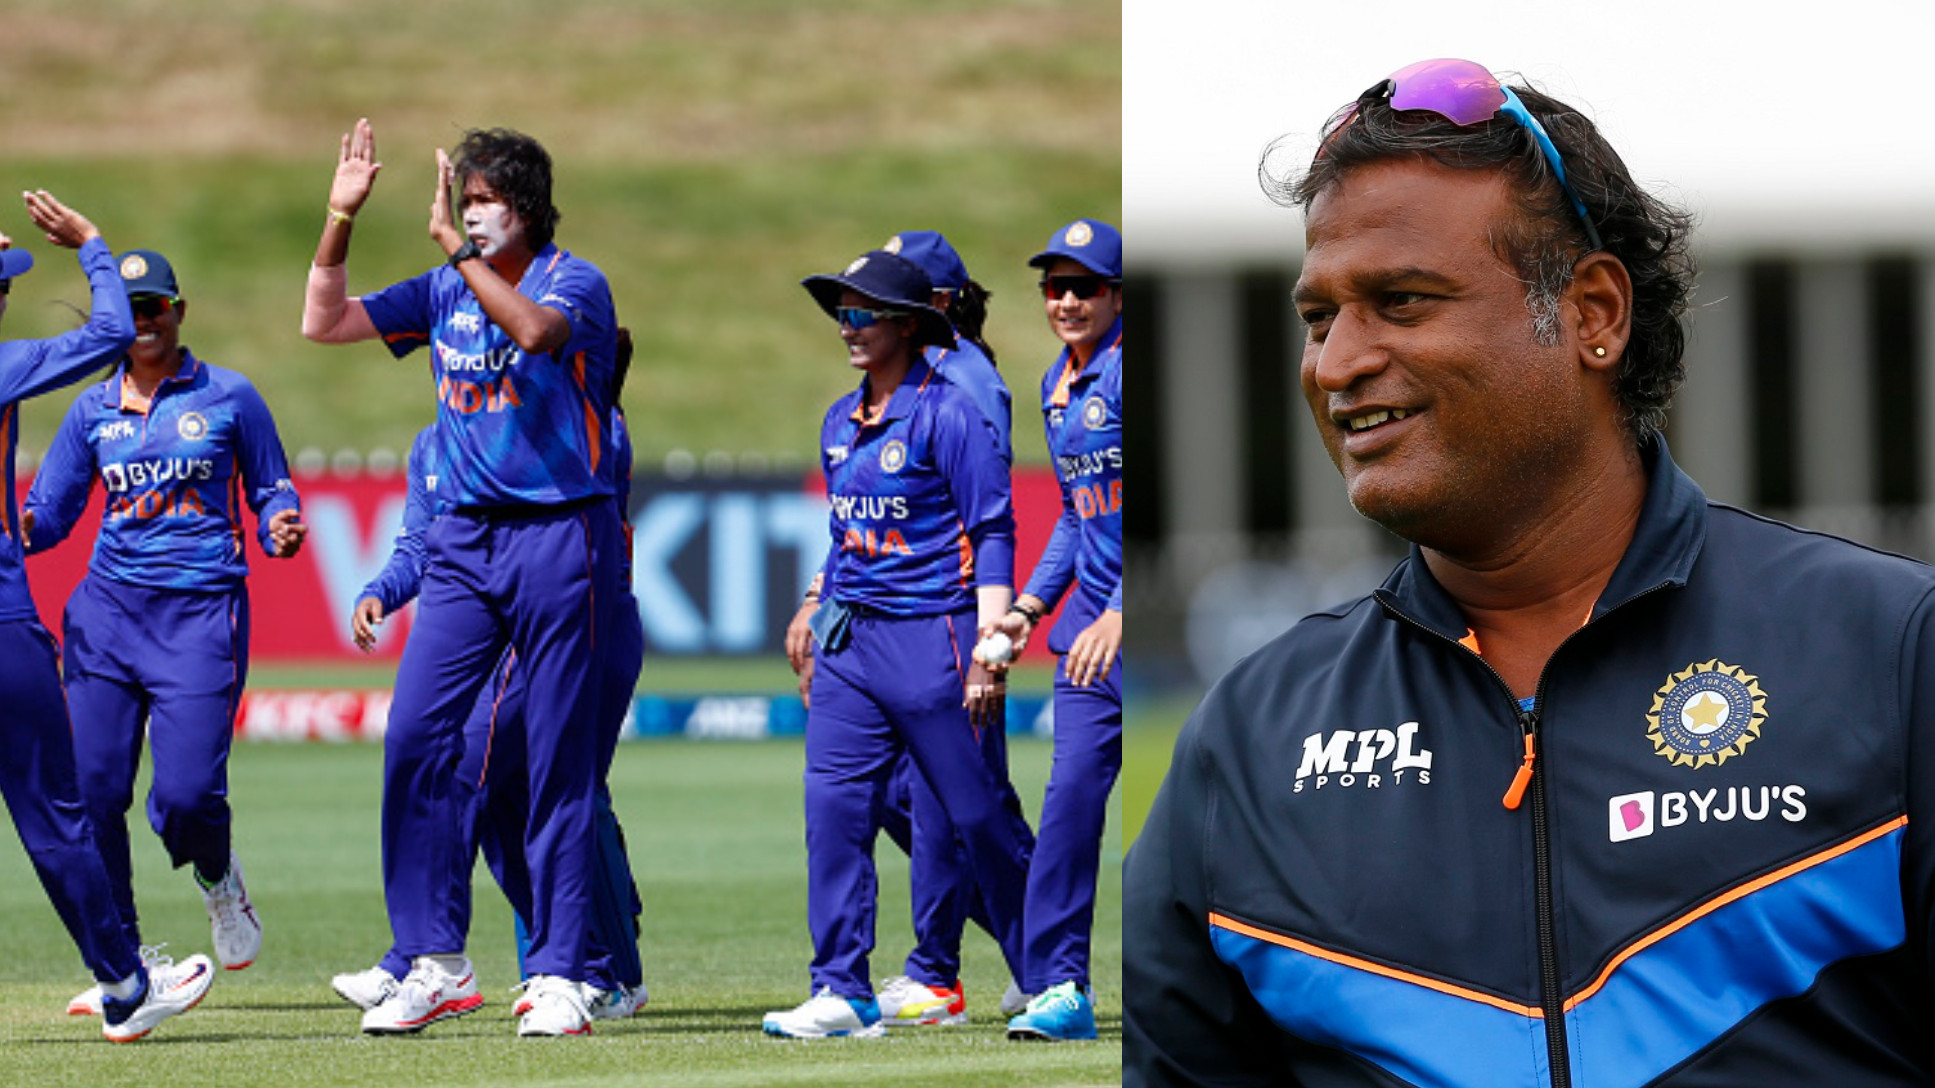 NZW v INDW 2022: India women’s team trying to assess how to take wickets in middle overs- Romesh Powar